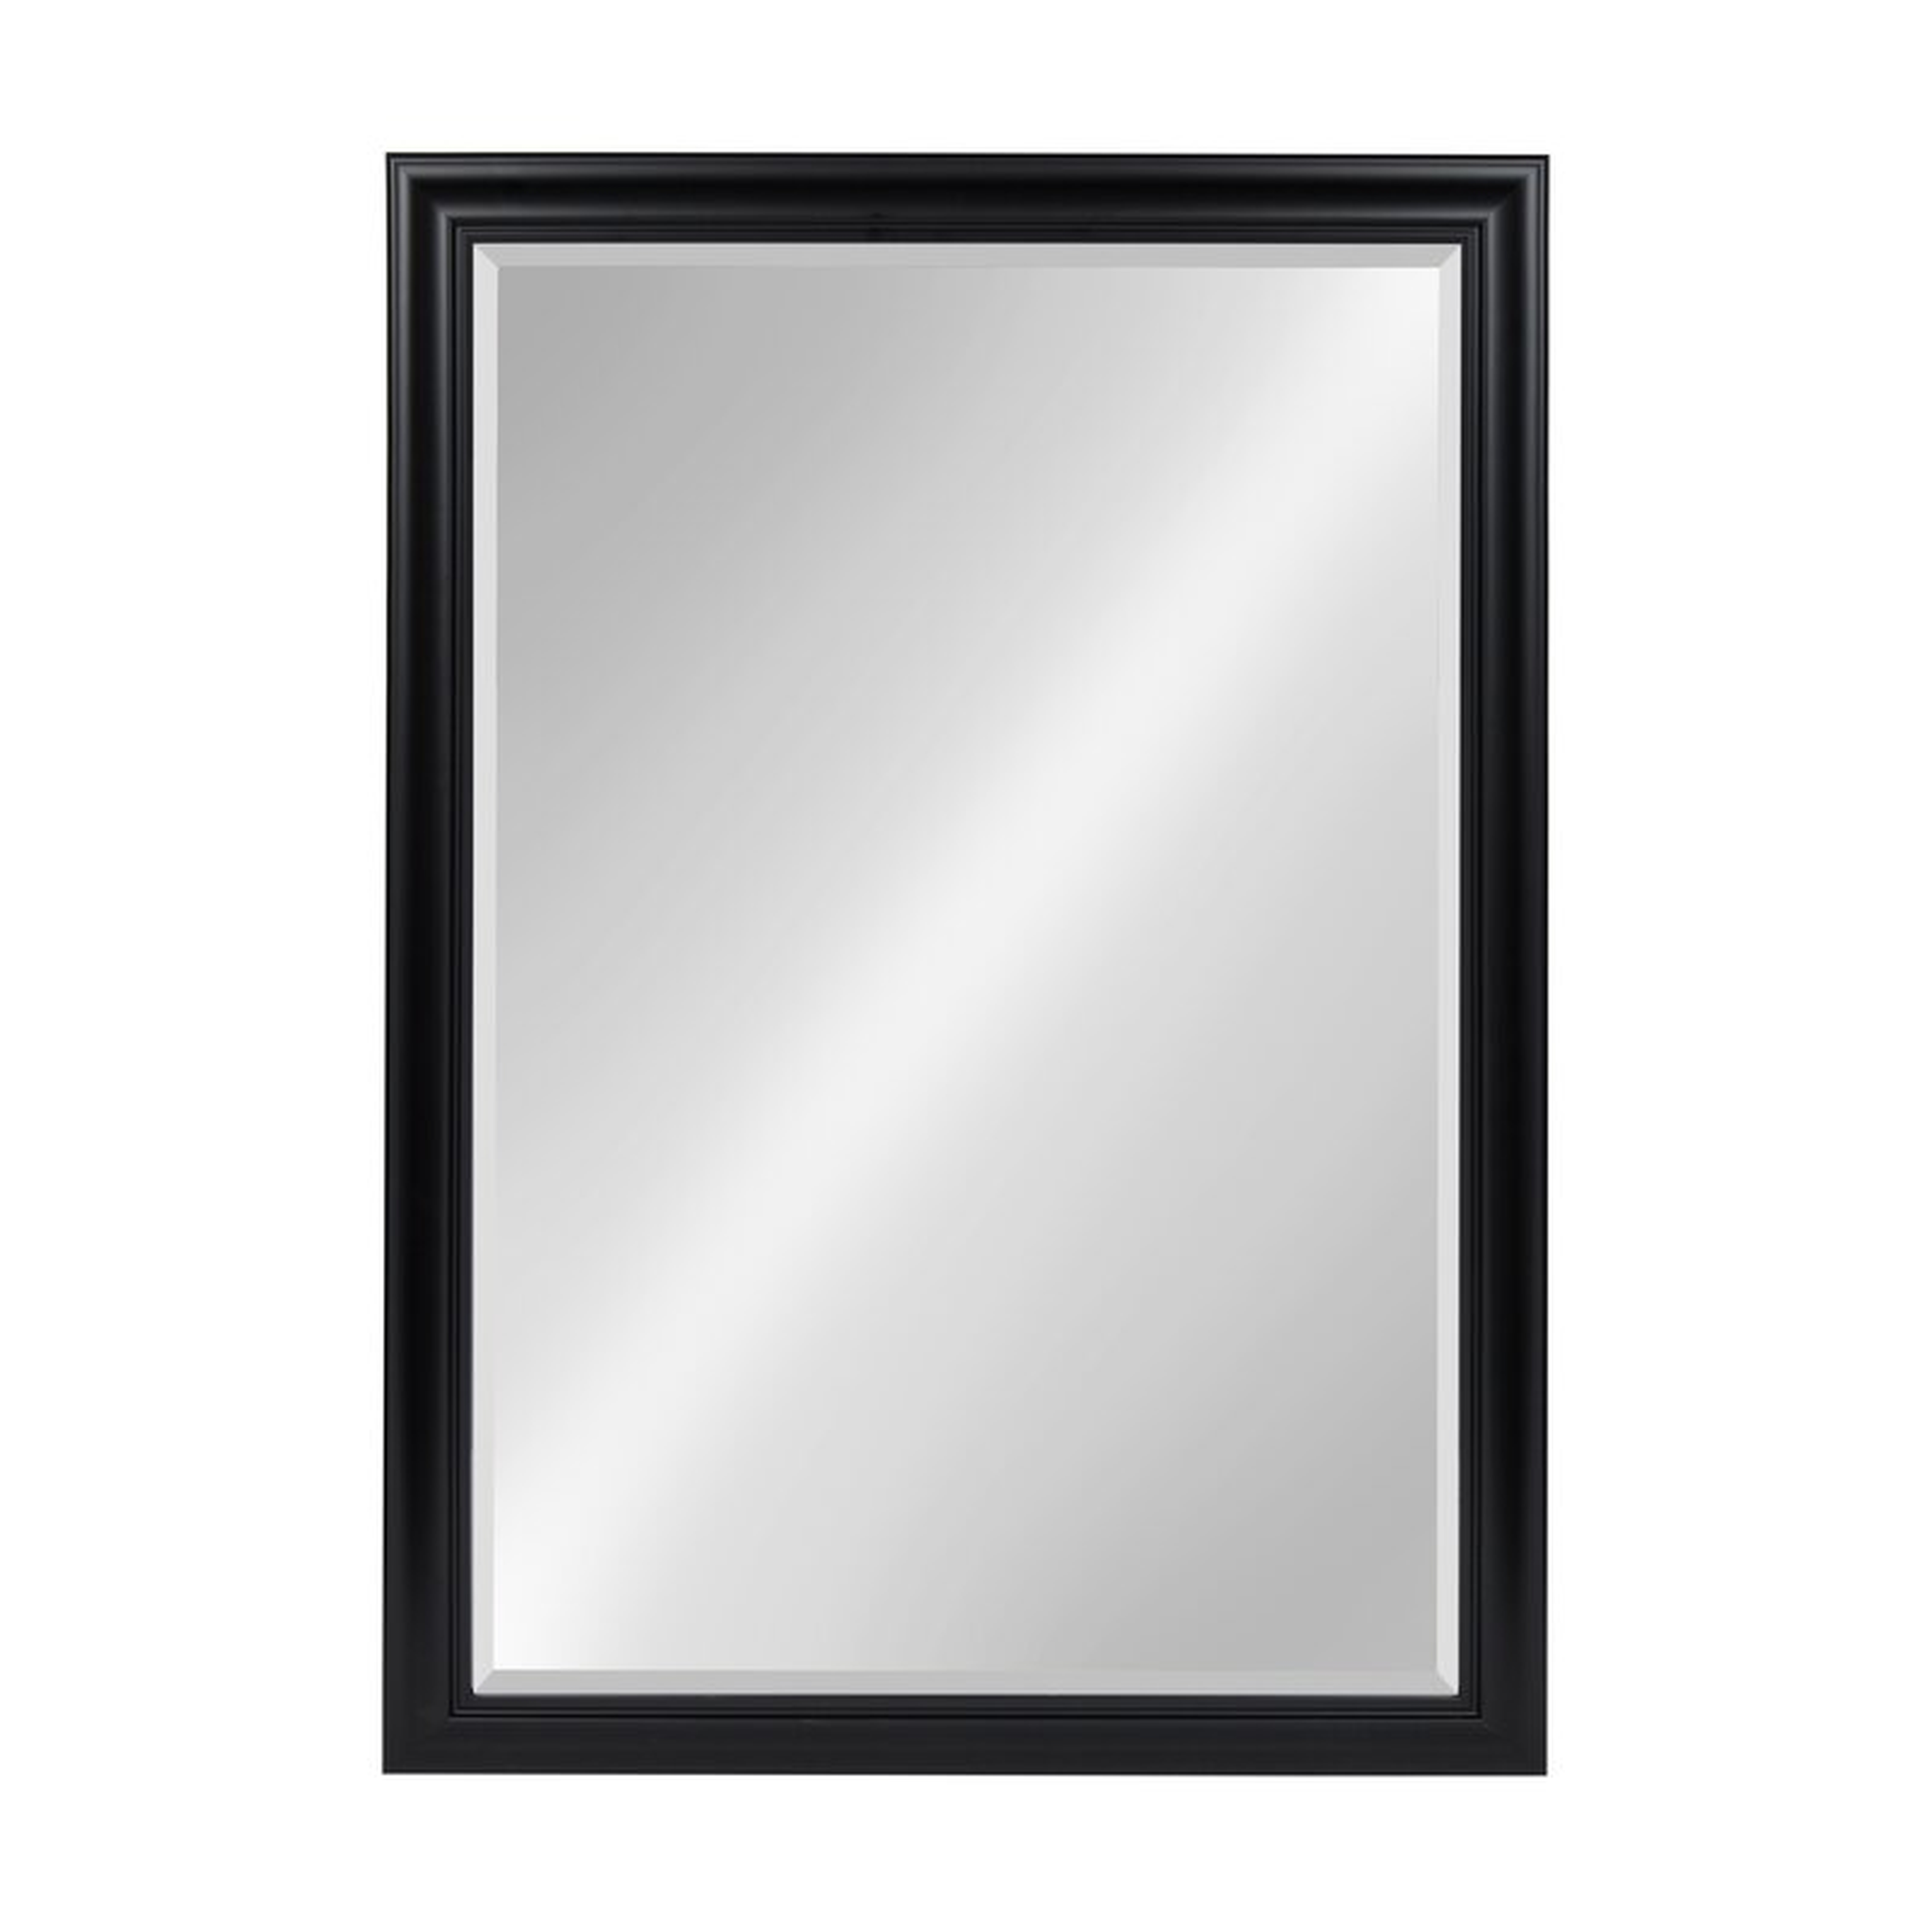 Hegarty Square Framed Accent Mirror - Wayfair